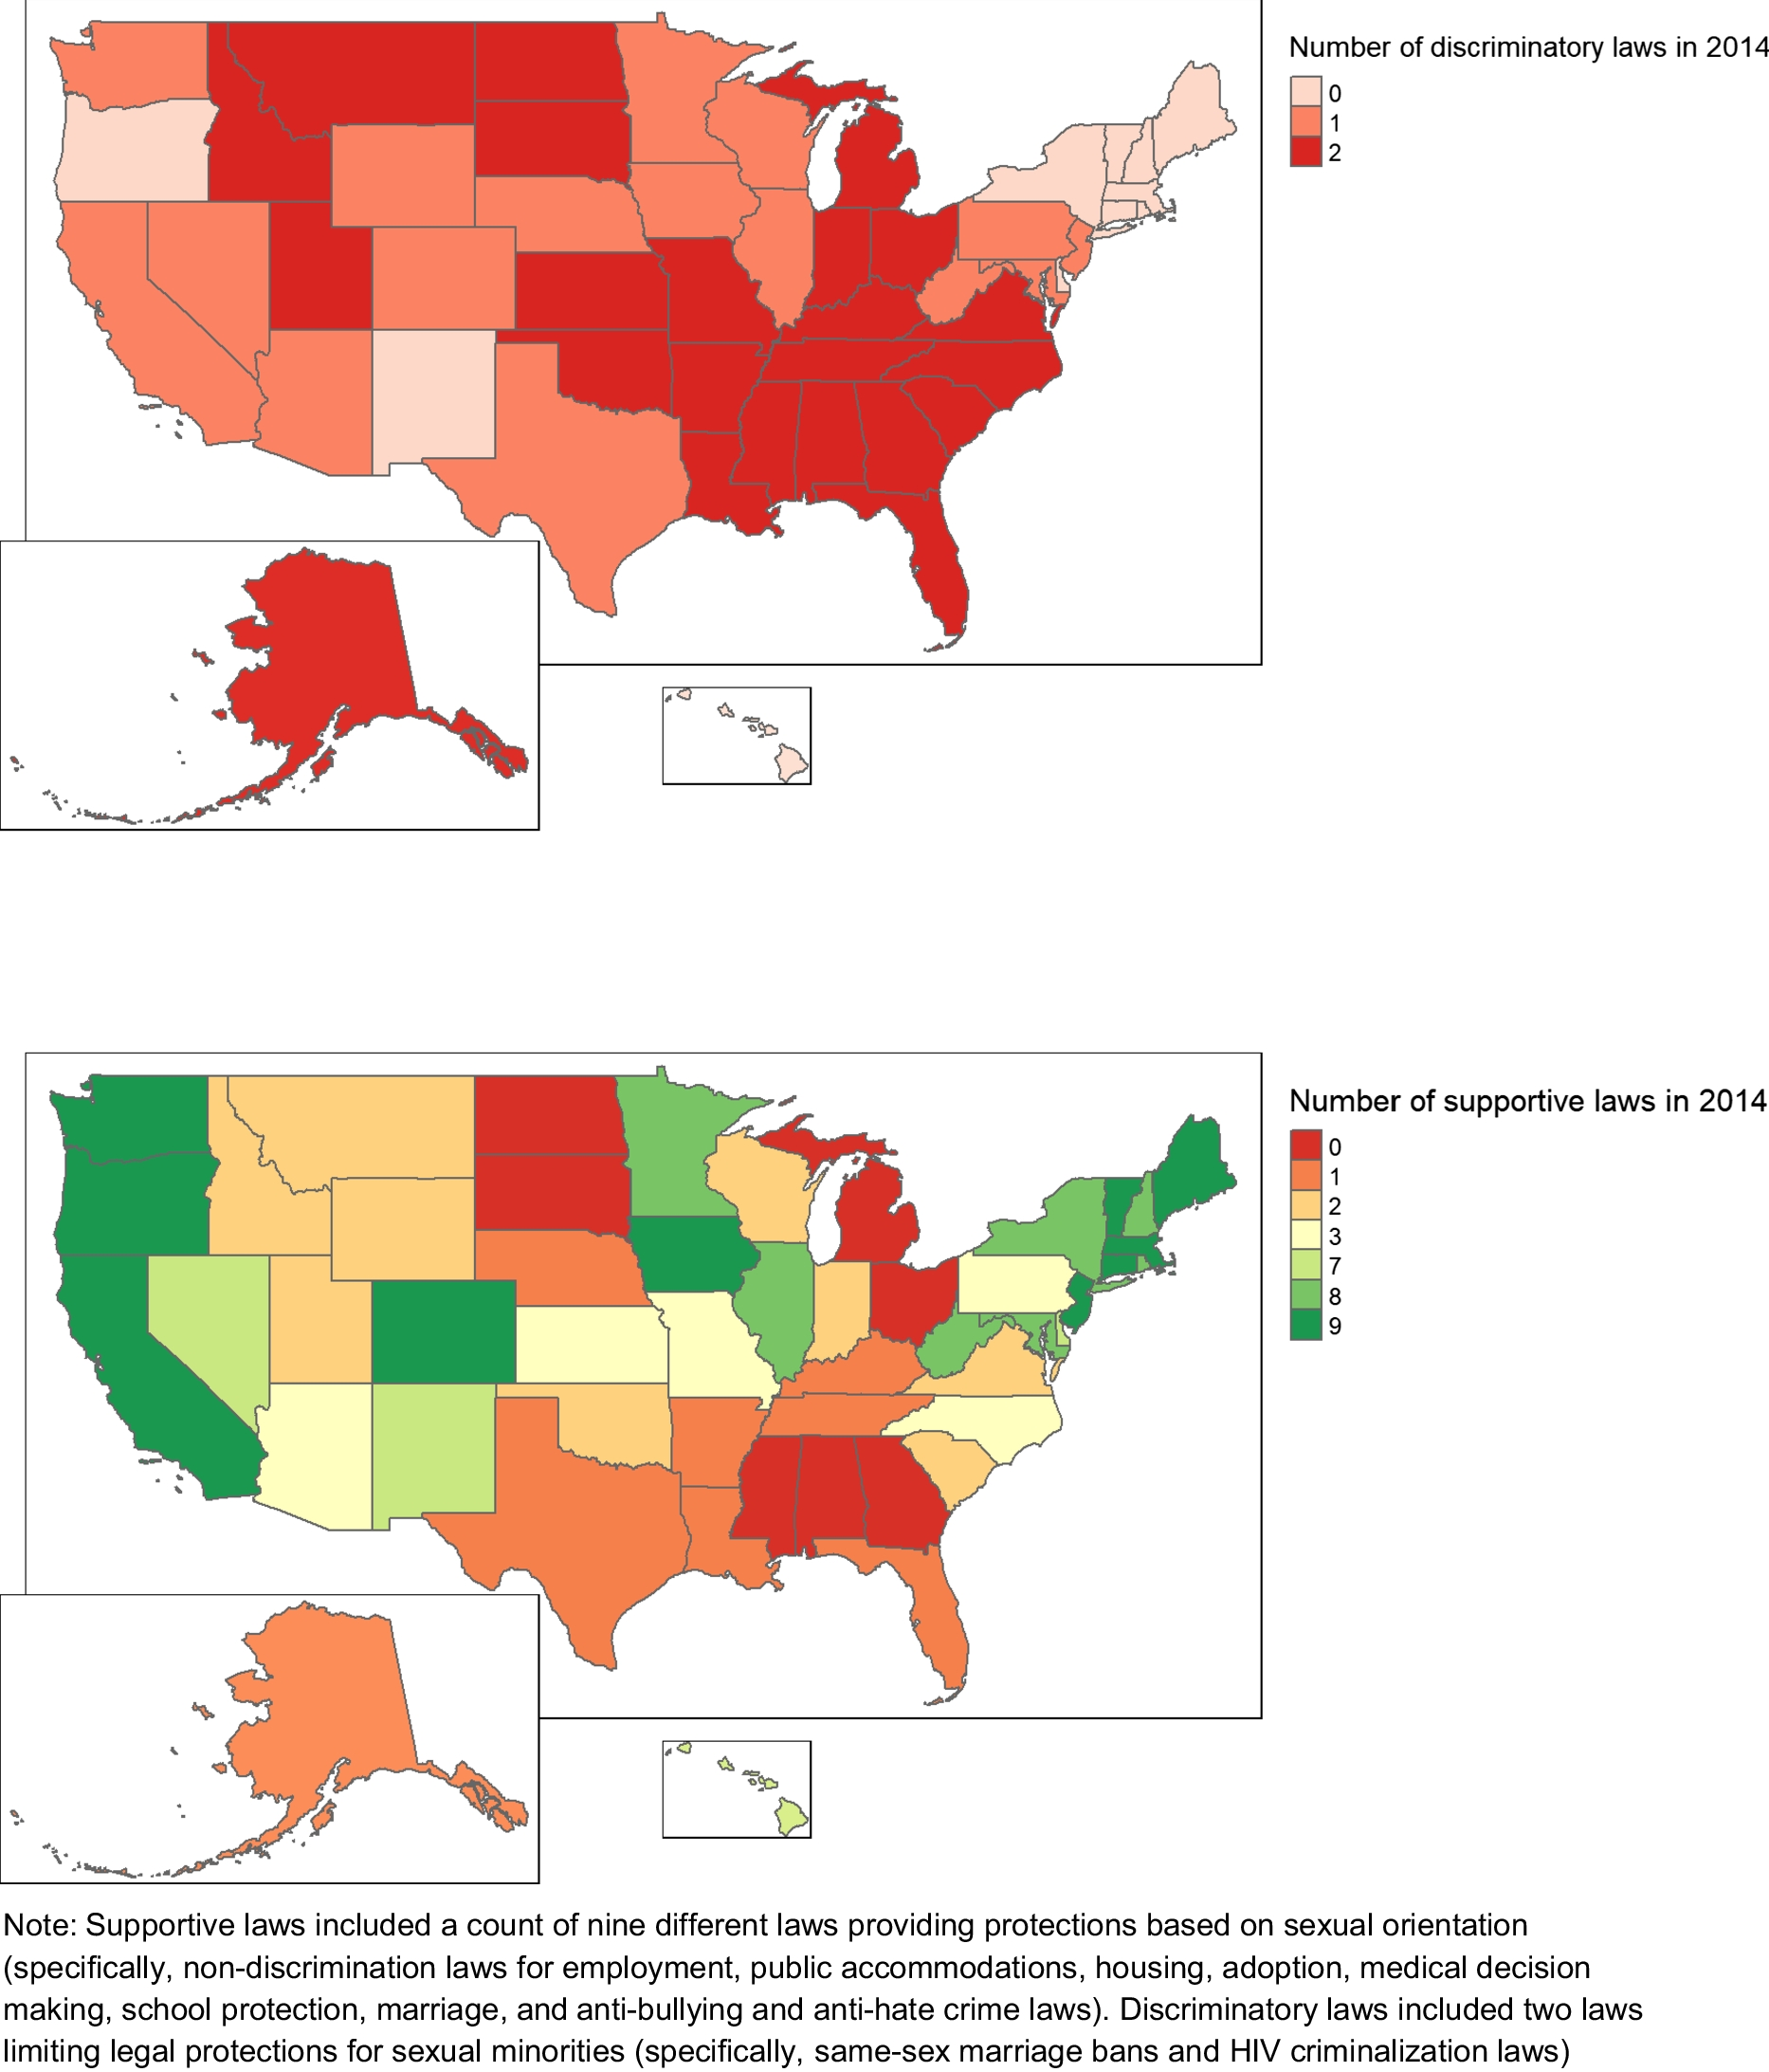 Structural Discrimination against and Structural Support for Lesbian, Gay, and Bisexual People as a Predictor of Late HIV Diagnoses among Black Men who Have Sex with Men